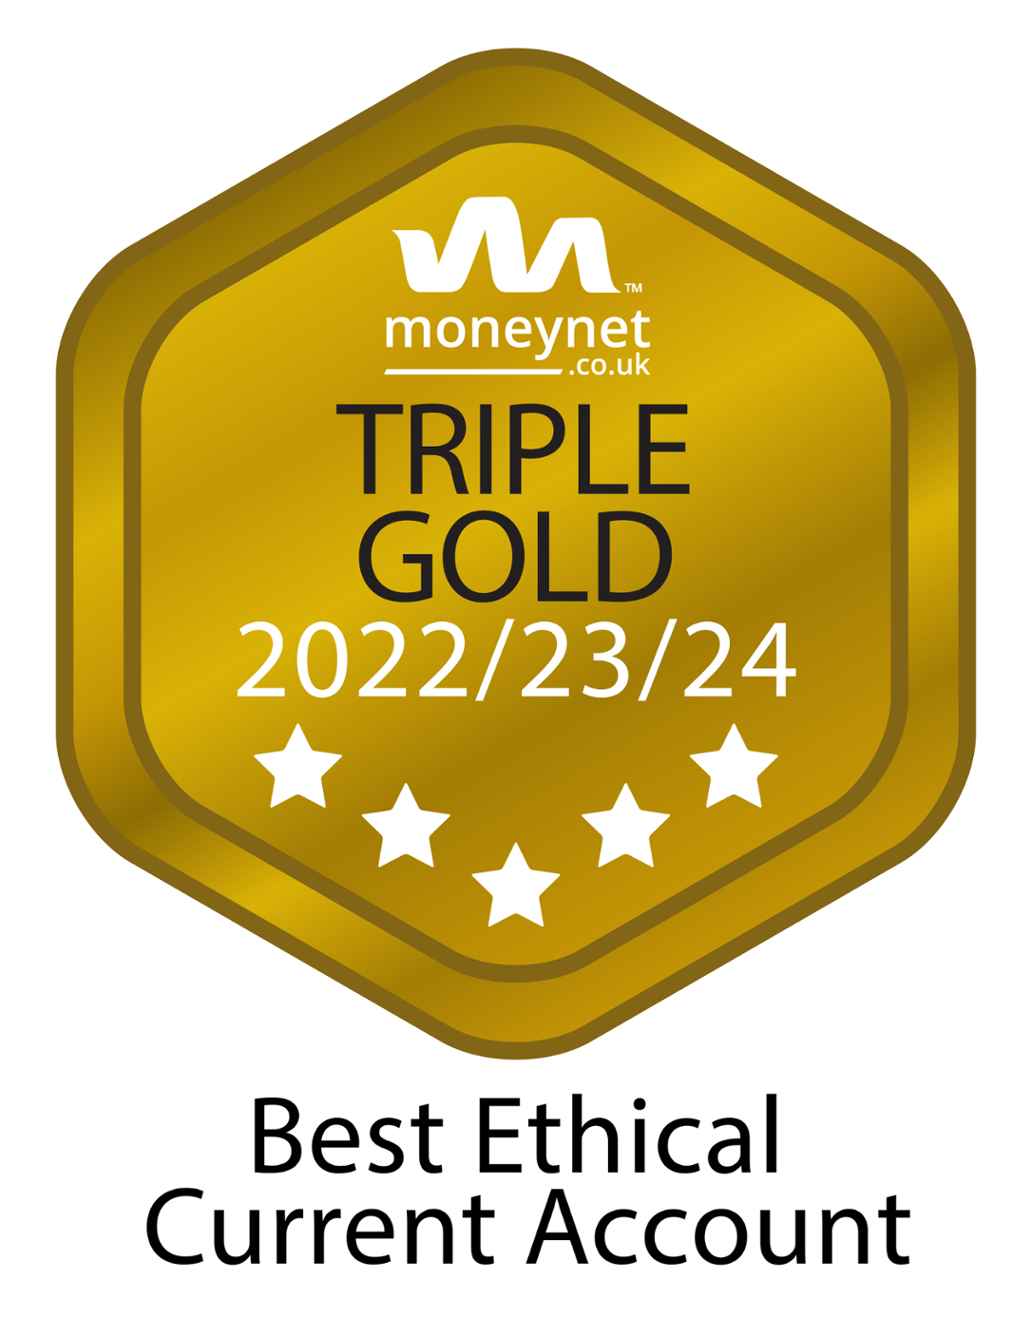 Moneynet triple gold 2022, 23 24 best ethical current account